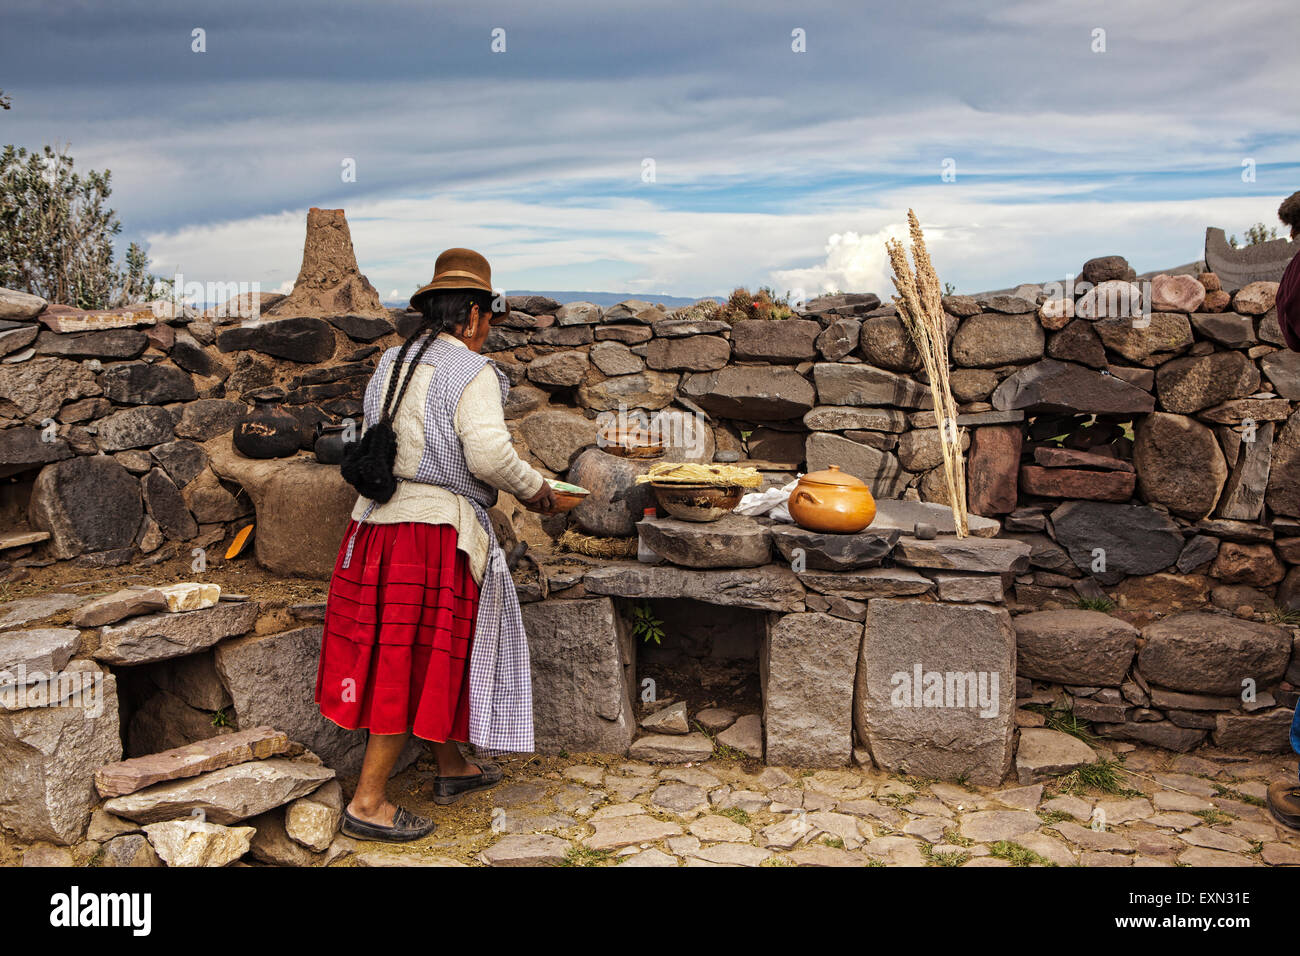 Older Woman demonstrates how to make potato bread in an outdoor oven in the high Andes of Peru. Stock Photo